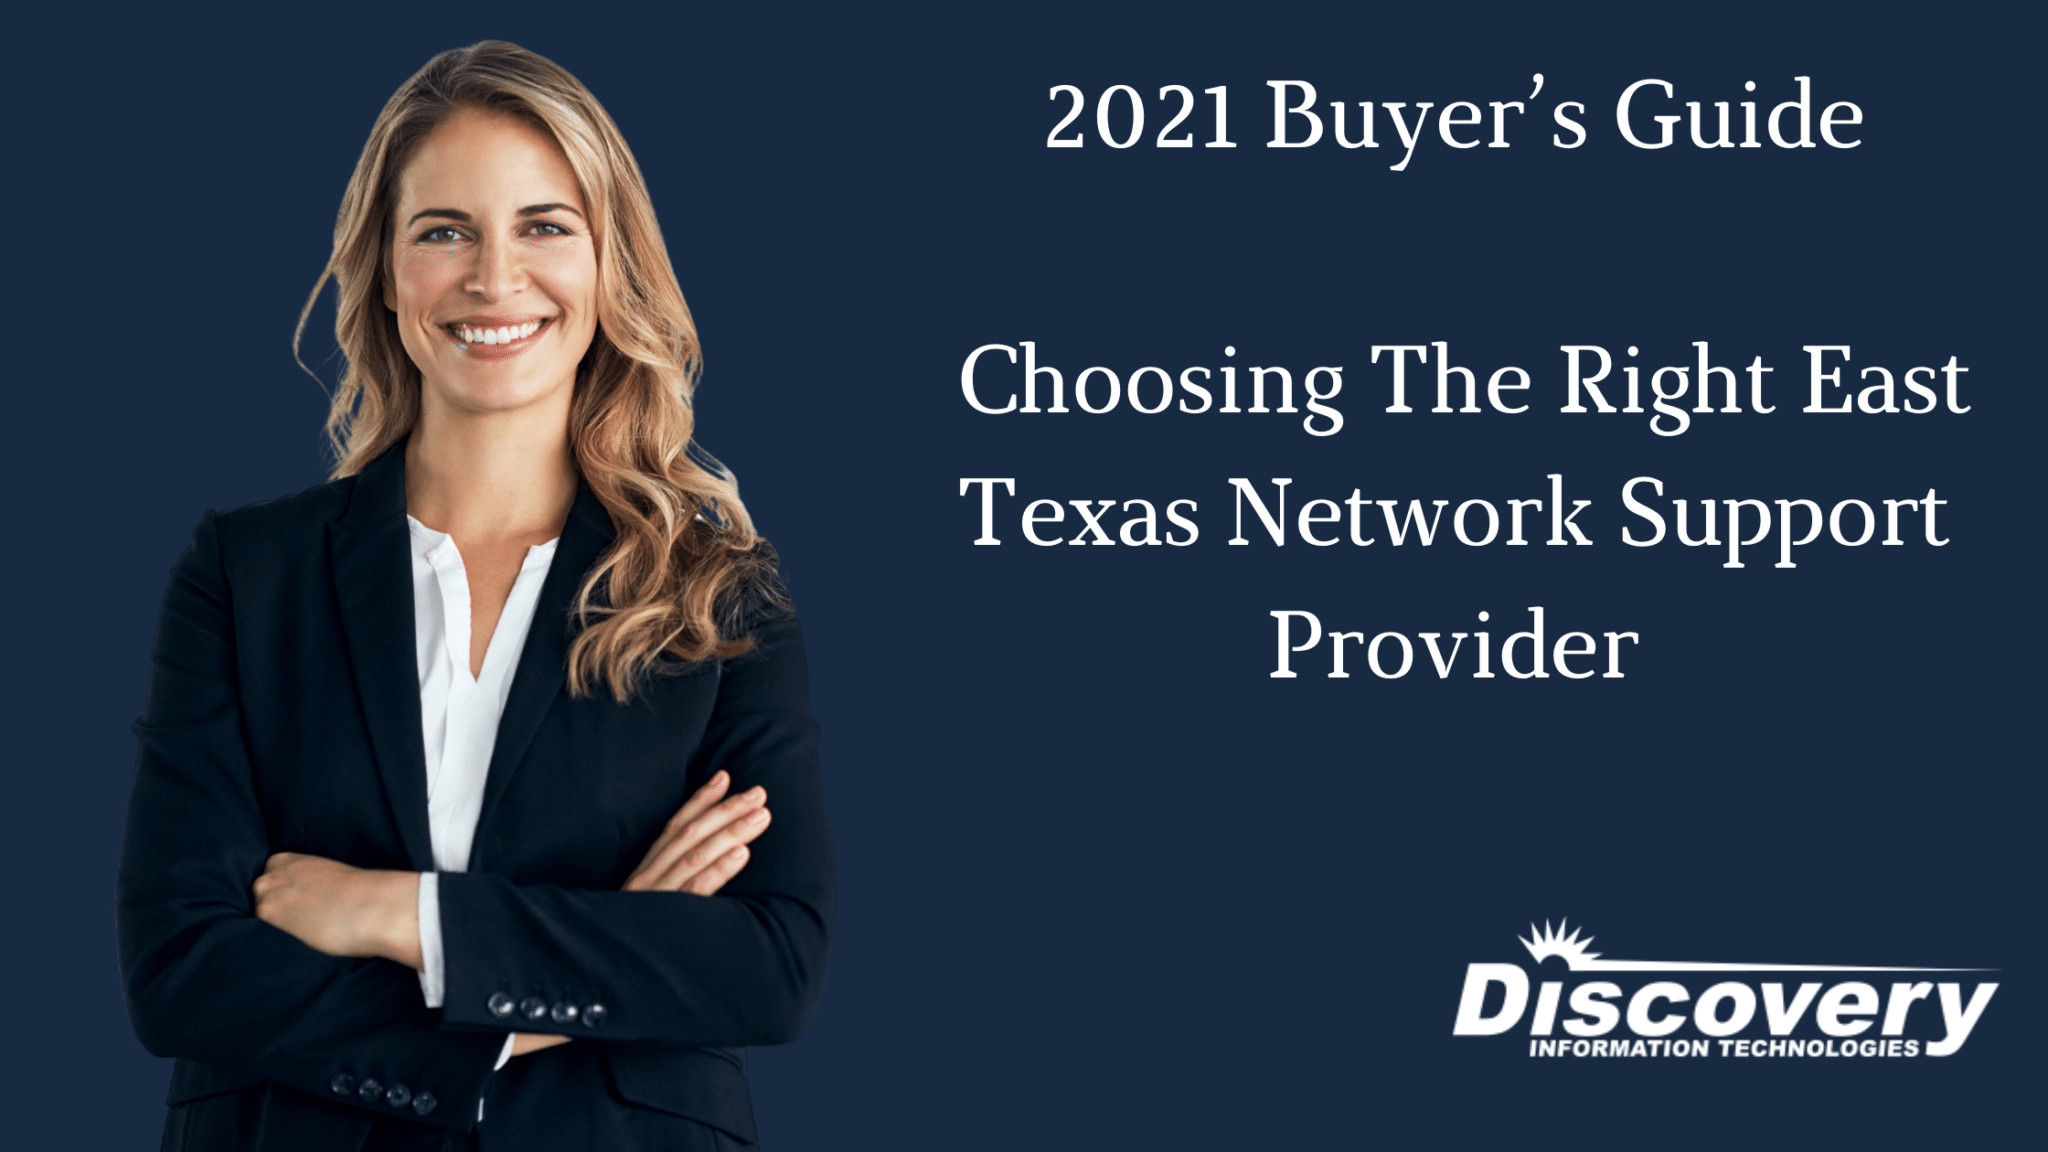 Choosing The Right East Texas Network Support Provider